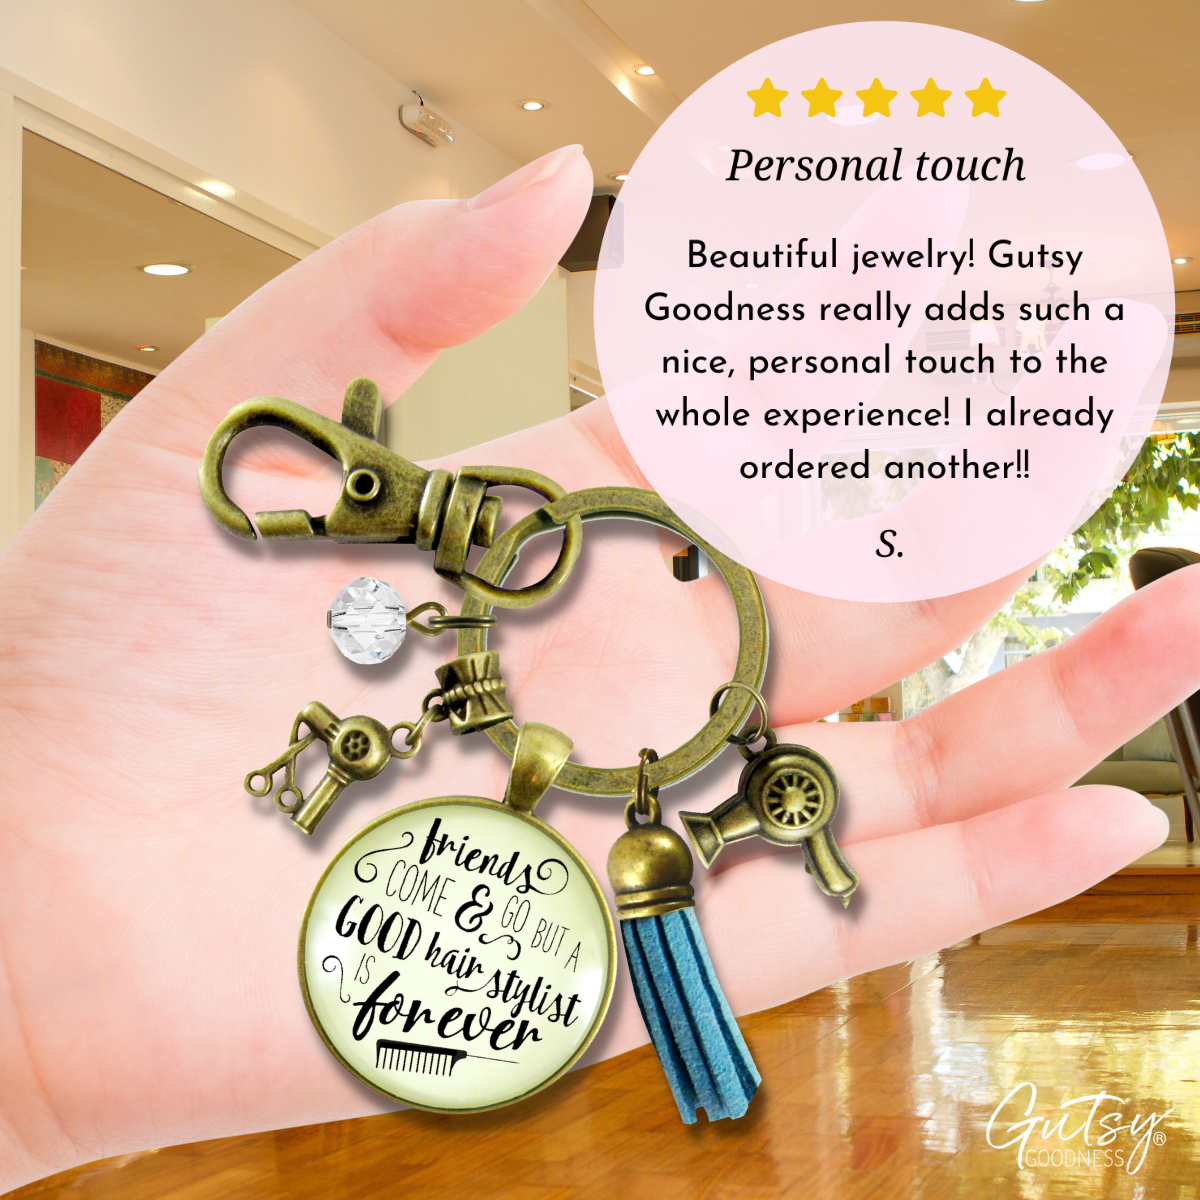 Hair Stylist Keychain Friends Come Go Hair Stylist Forever Beautician Glam Quote Jewelry Tassel - Gutsy Goodness Handmade Jewelry;Hair Stylist Keychain Friends Come Go Hair Stylist Forever Beautician Glam Quote Jewelry Tassel - Gutsy Goodness Handmade Jewelry Gifts